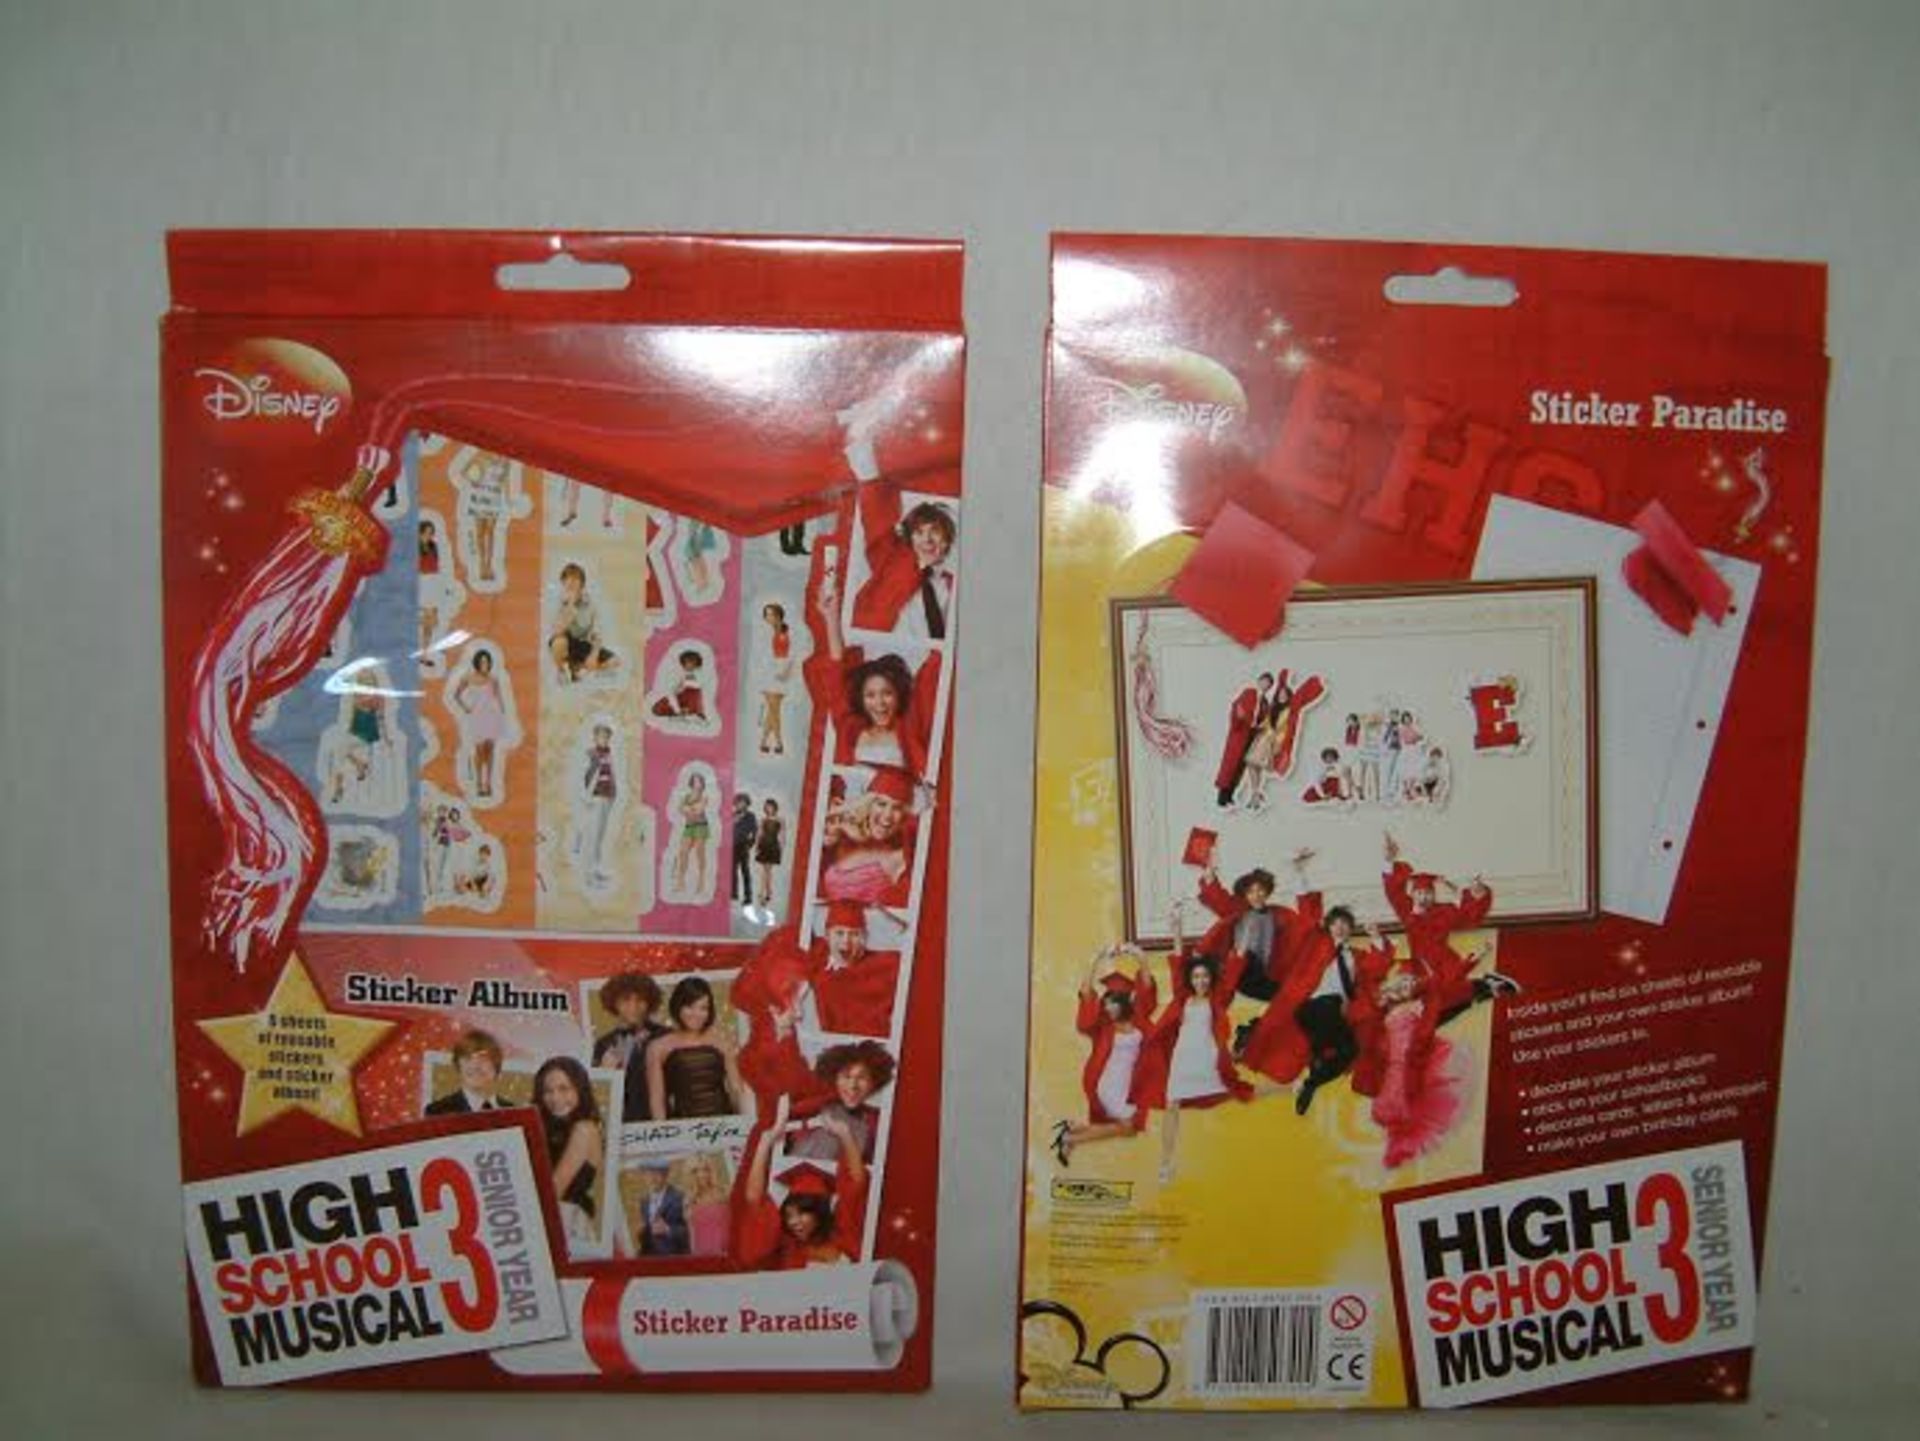 1500x DISNEY High School Musical 3 Sticker Sets. There are 6 sheets of reusable stickers and a